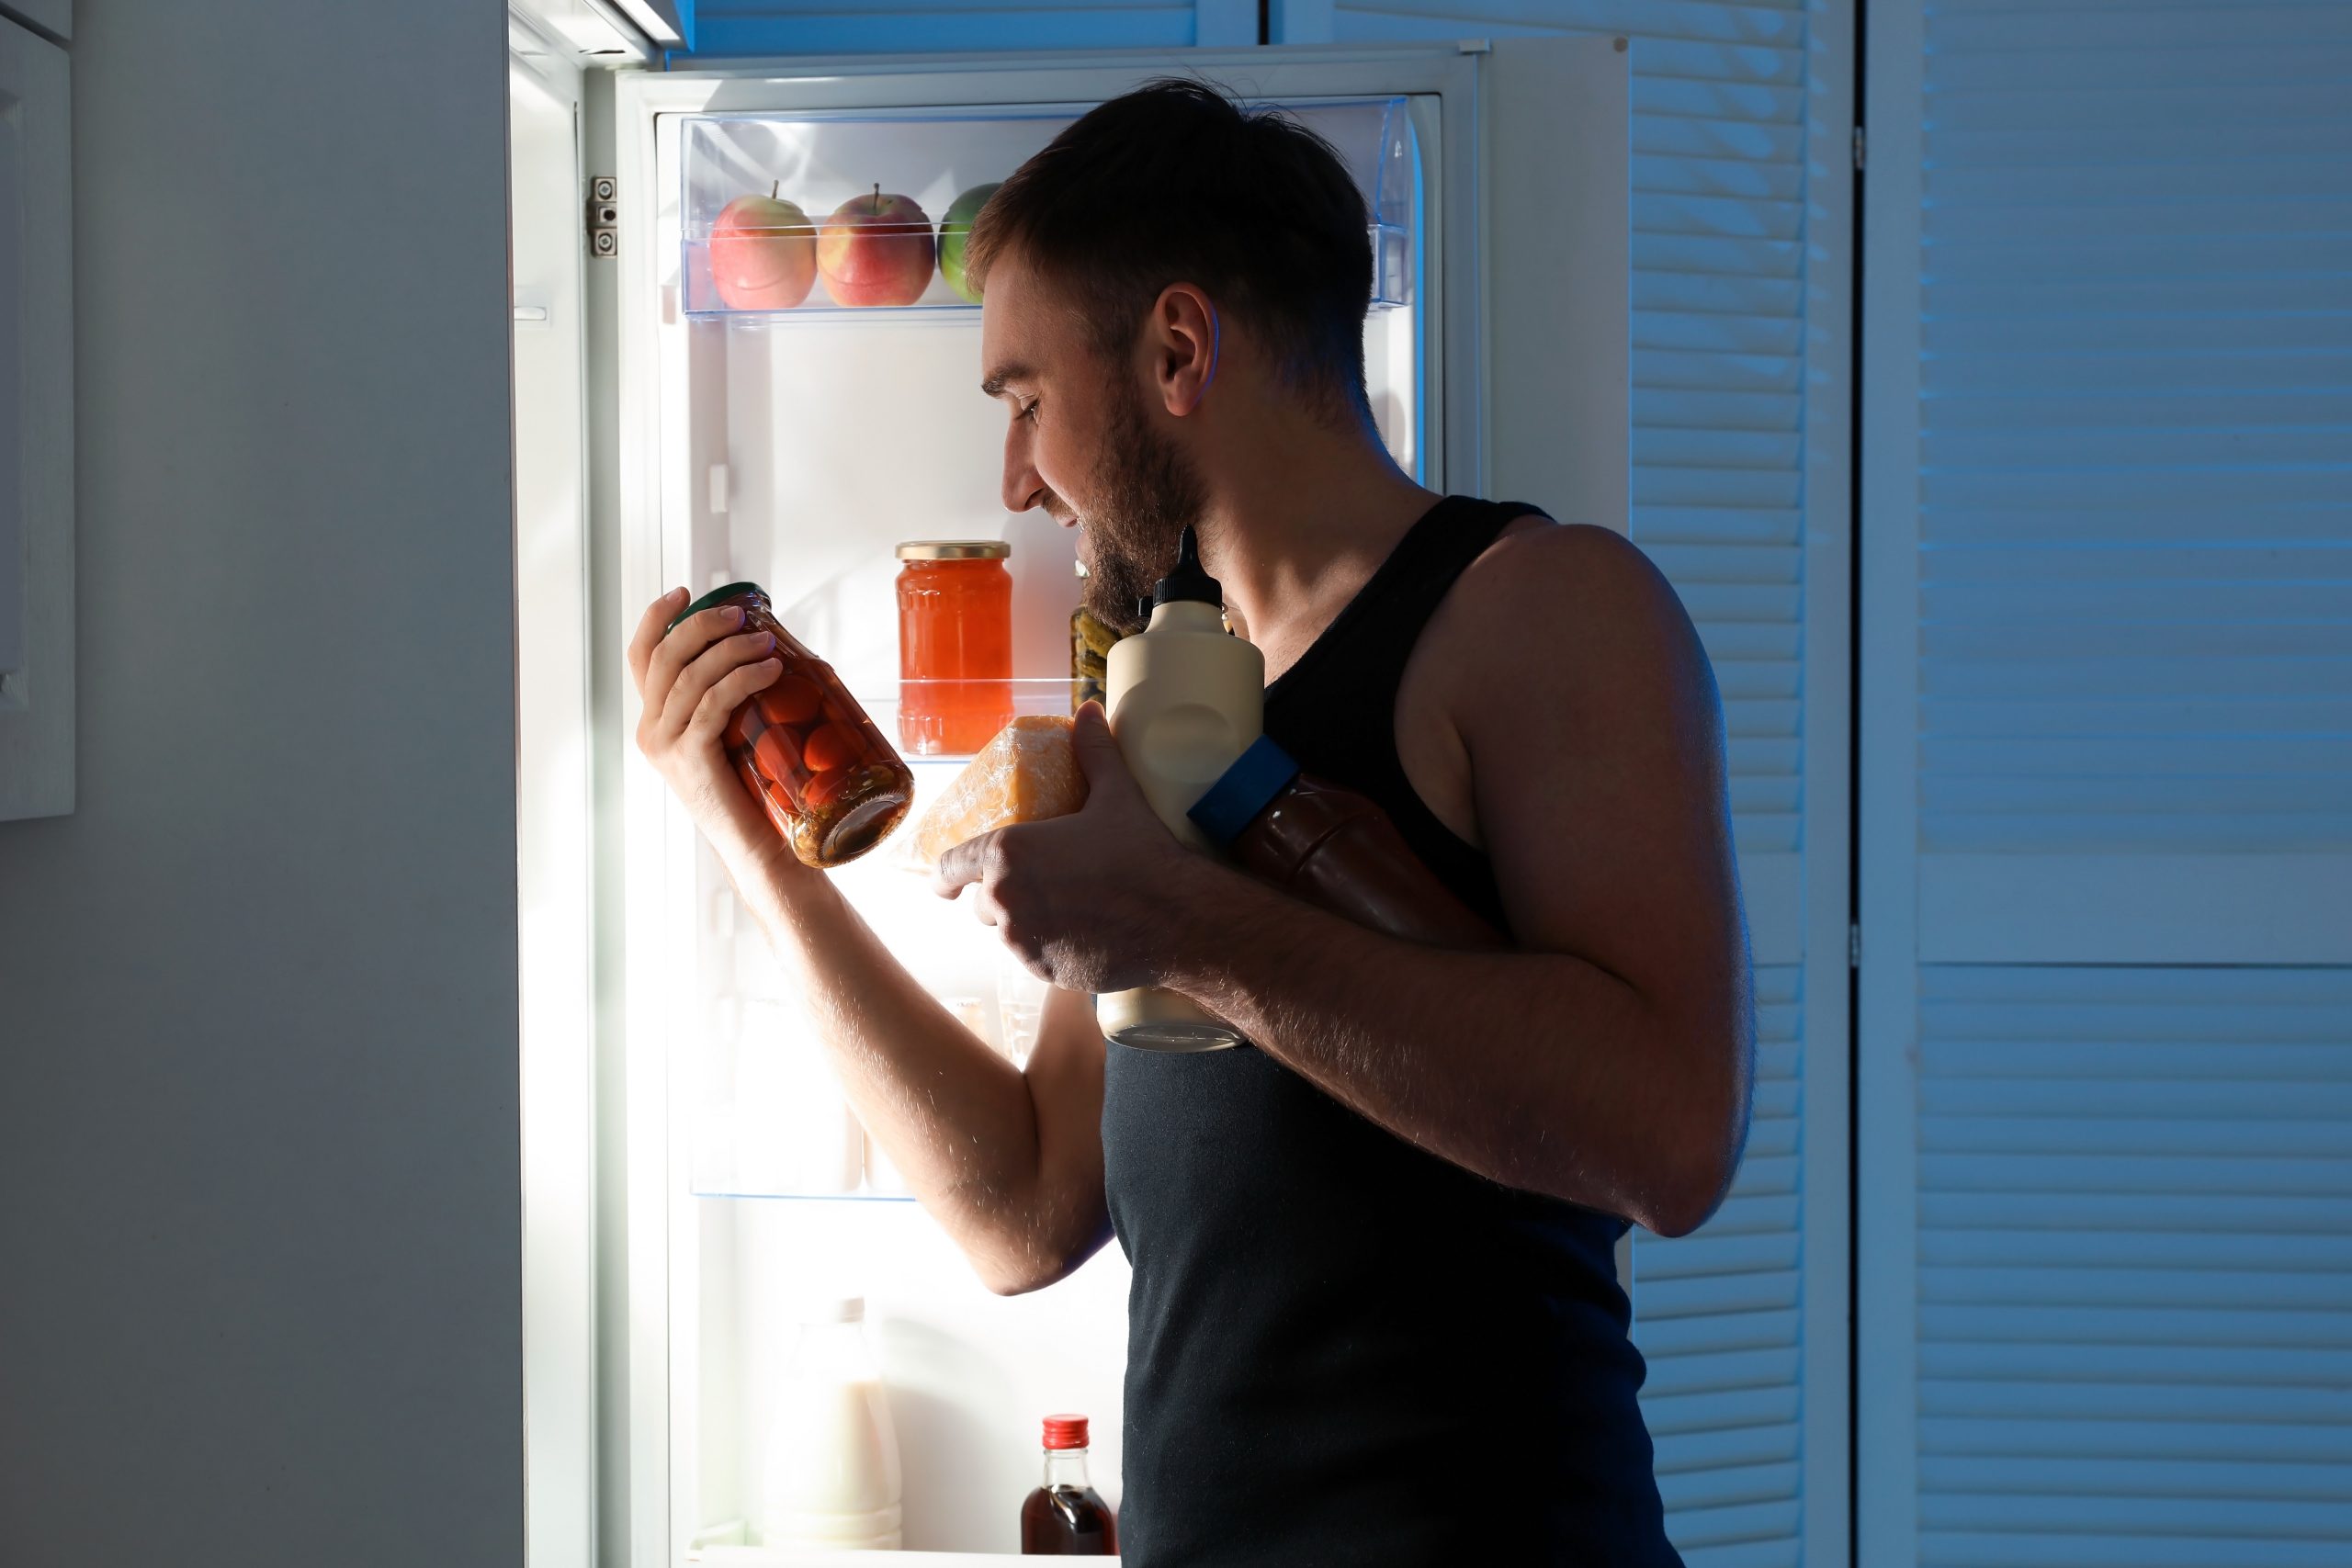 Man taking products out of refrigerator in kitchen at night